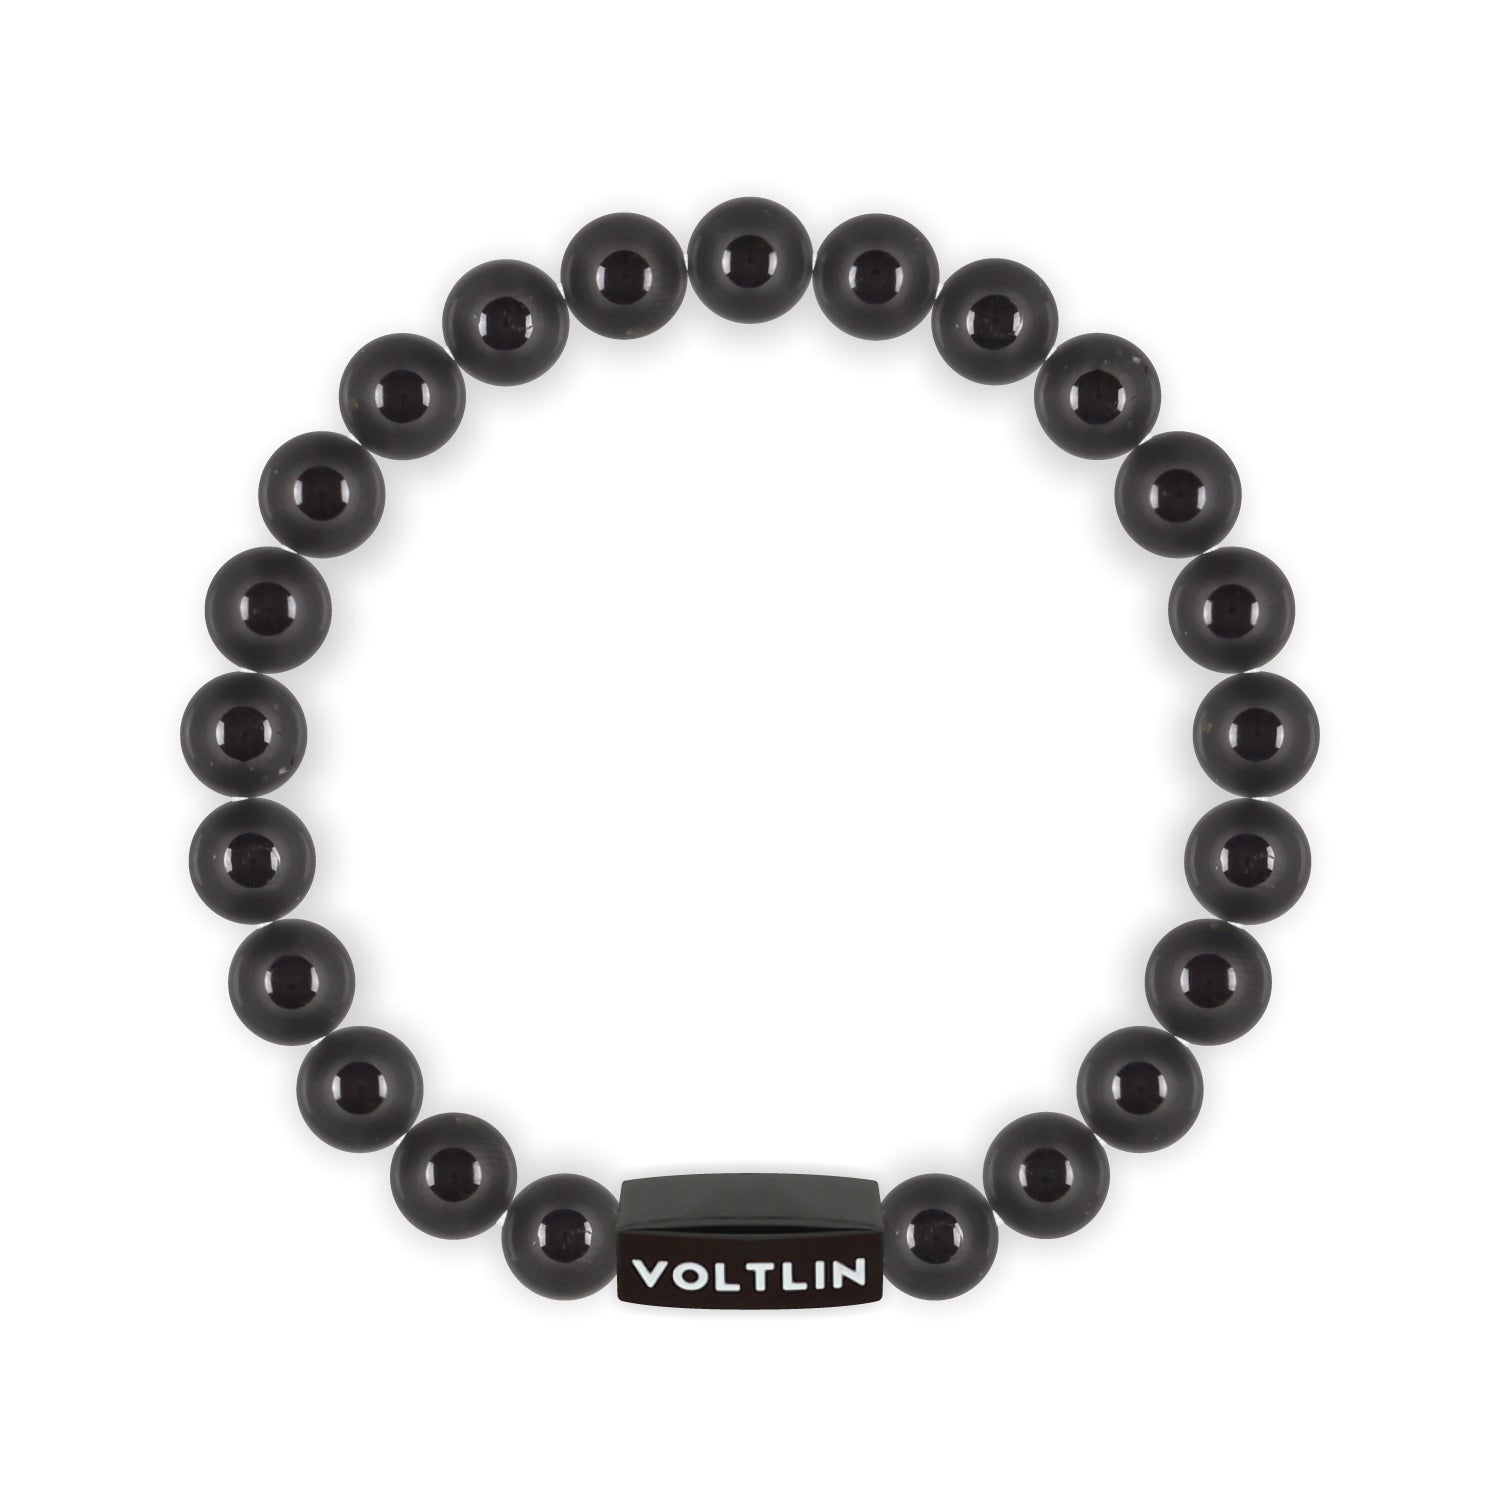 Front view of an 8mm Black Tourmaline crystal beaded stretch bracelet with black stainless steel logo bead made by Voltlin